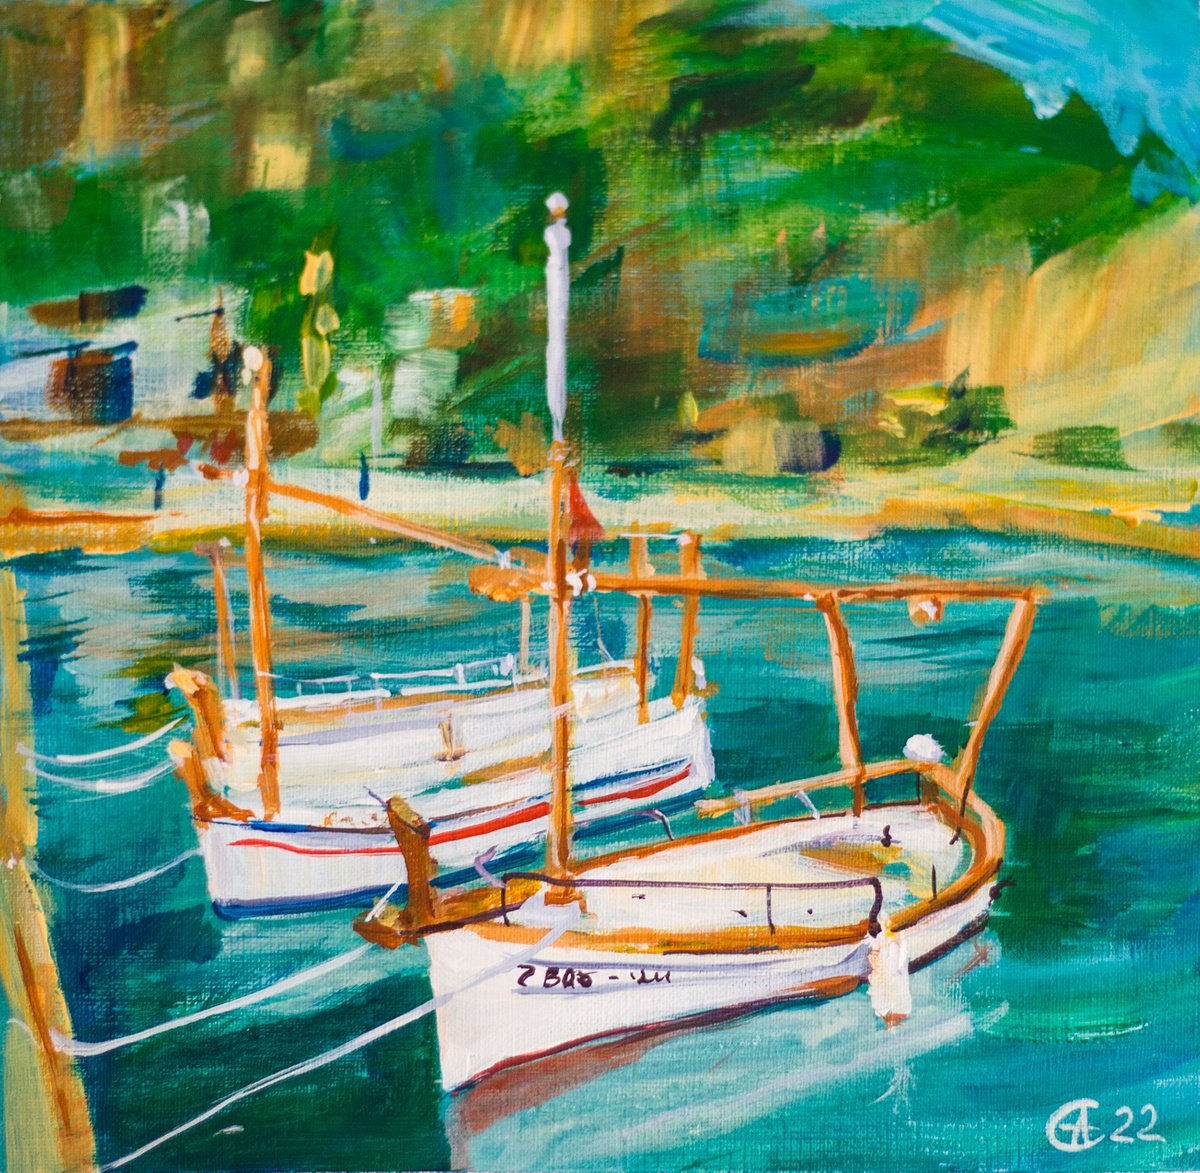 Seaside town in Catalunya. Sunny small landscape with boats. Original acrylic painting spa... by Sasha Romm